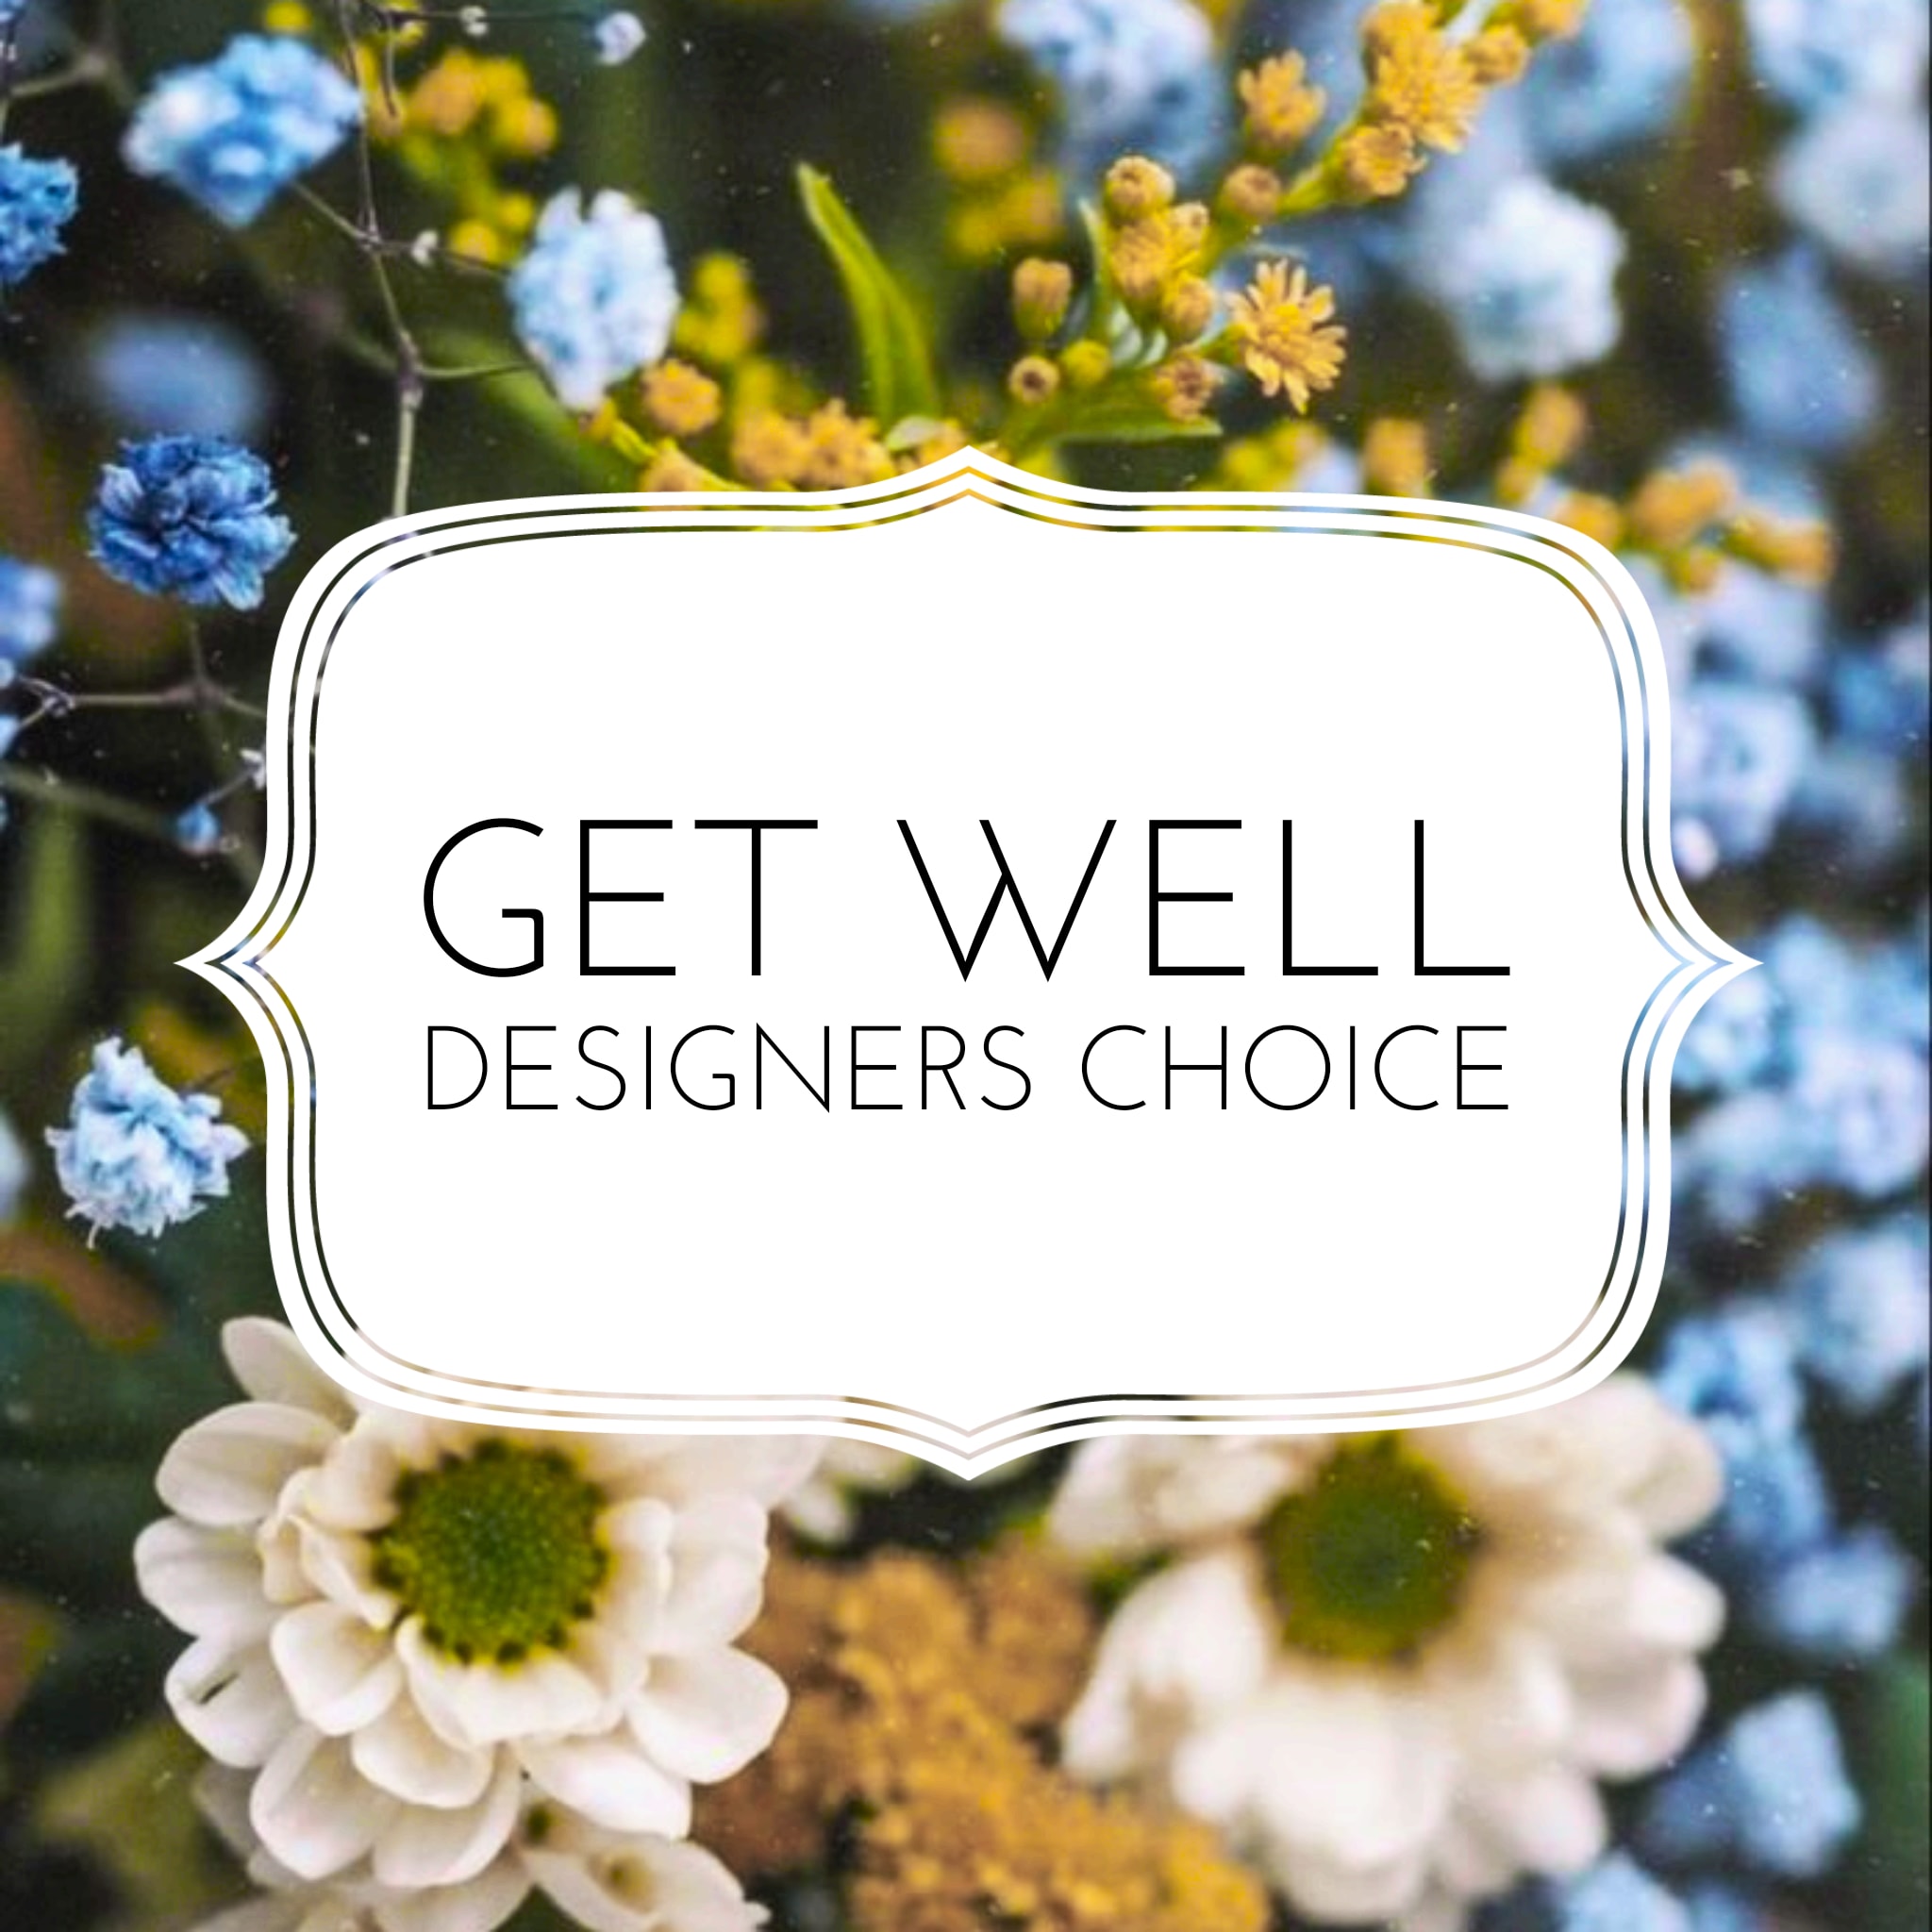 Get Well Designers Choice - Bring some cheer to those who might not feel as good as they should. Flowers are a fantastic way of spreading love and brightness to those under the weather. Our designers will create a stunning bouquet with the freshest blooms available.  *Please Note:* The reason no picture is shown is because every designer's choice arrangement looks different. We always make sure to fill your bouquet to value, but by picking the designer's choice arrangement, you are allowing one of our designers to make you something beautiful and one of a kind.